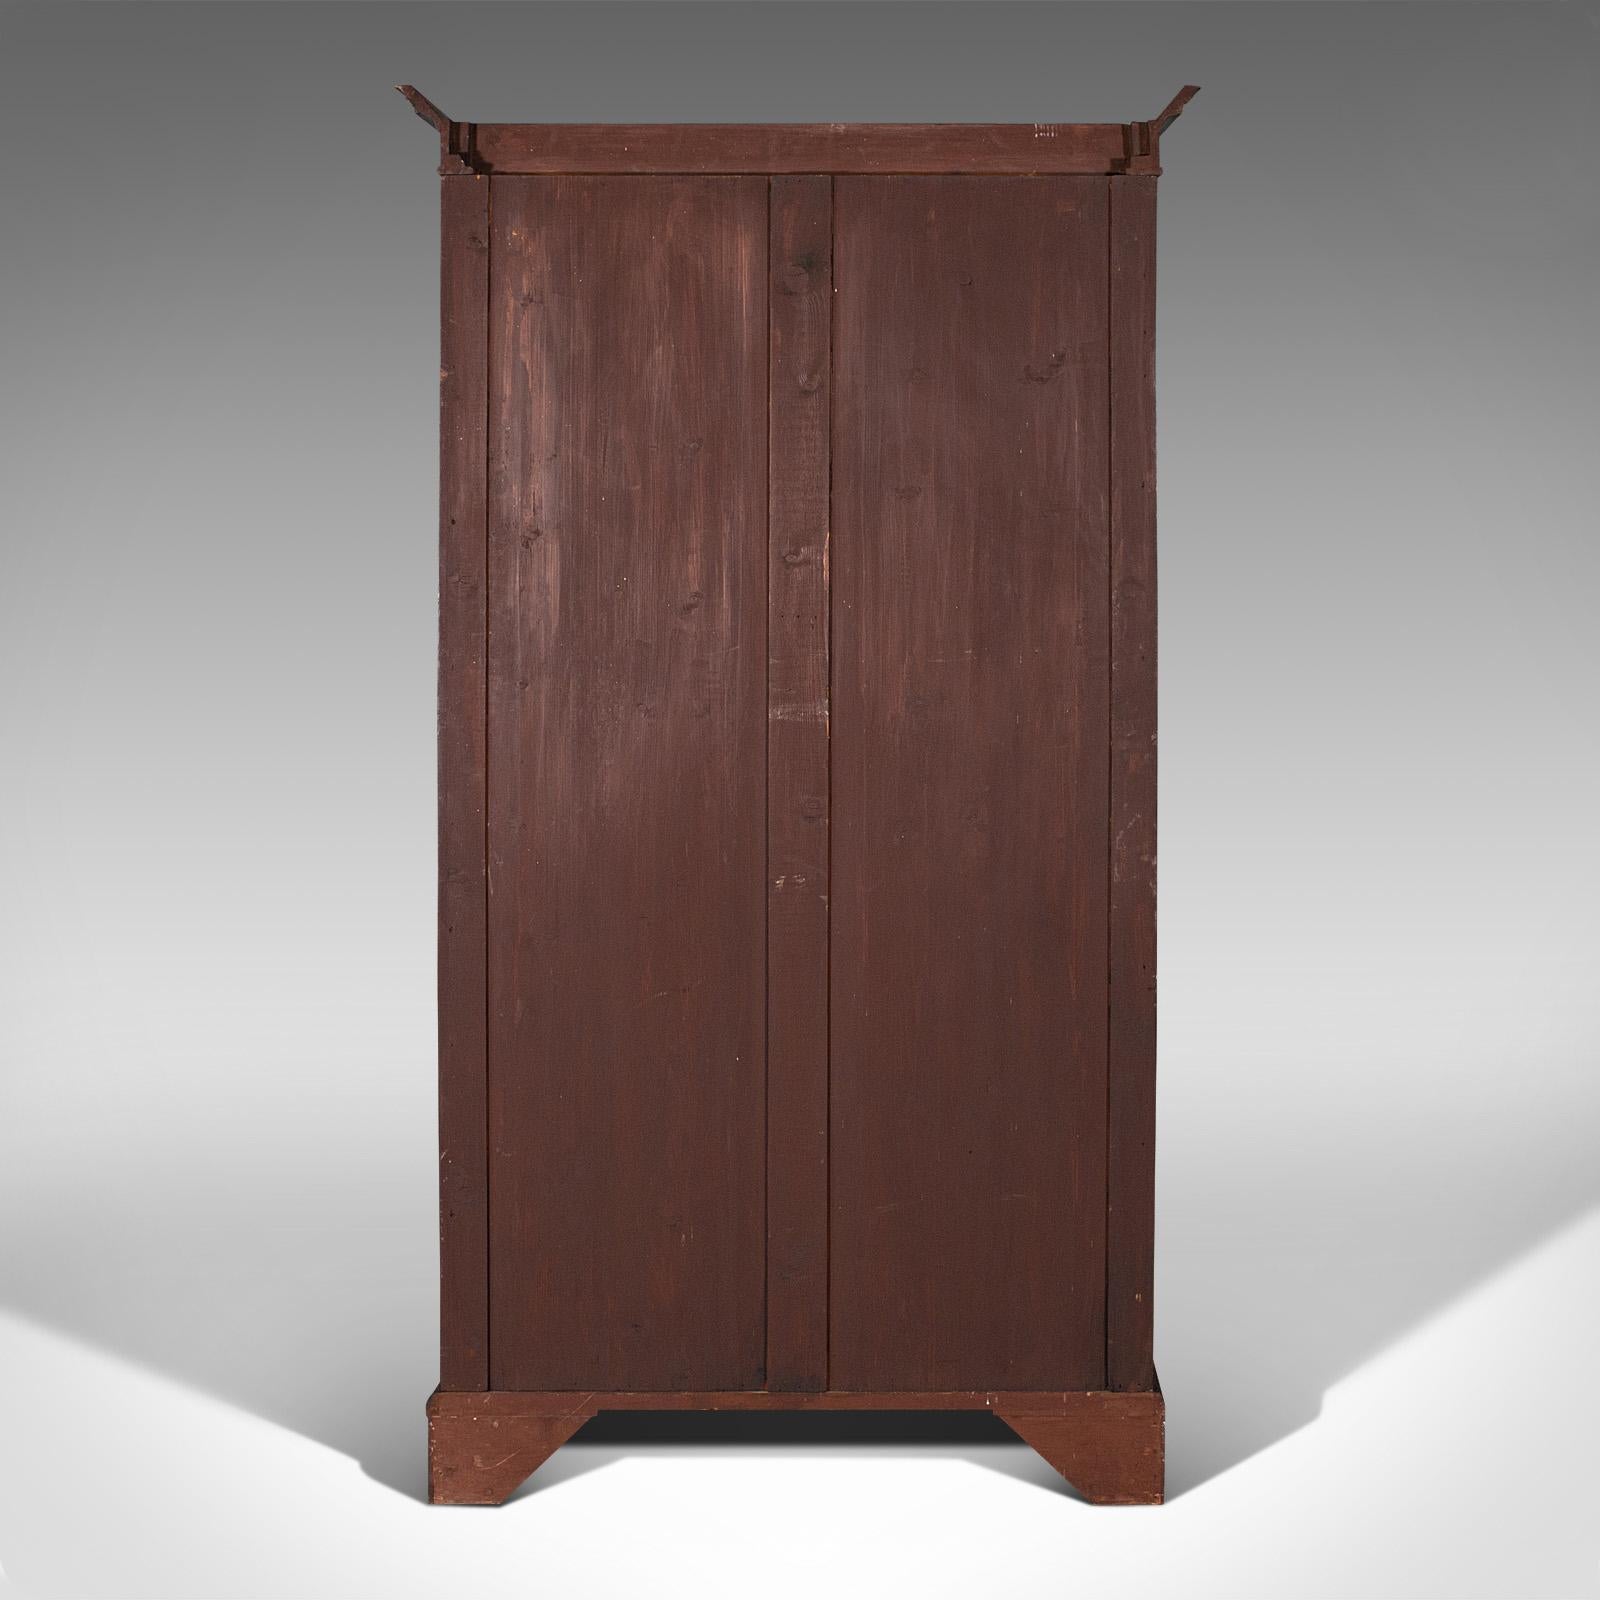 Wood Antique Linen Press, English, Tallboy Cabinet, Chest Of Drawers, Victorian, 1900